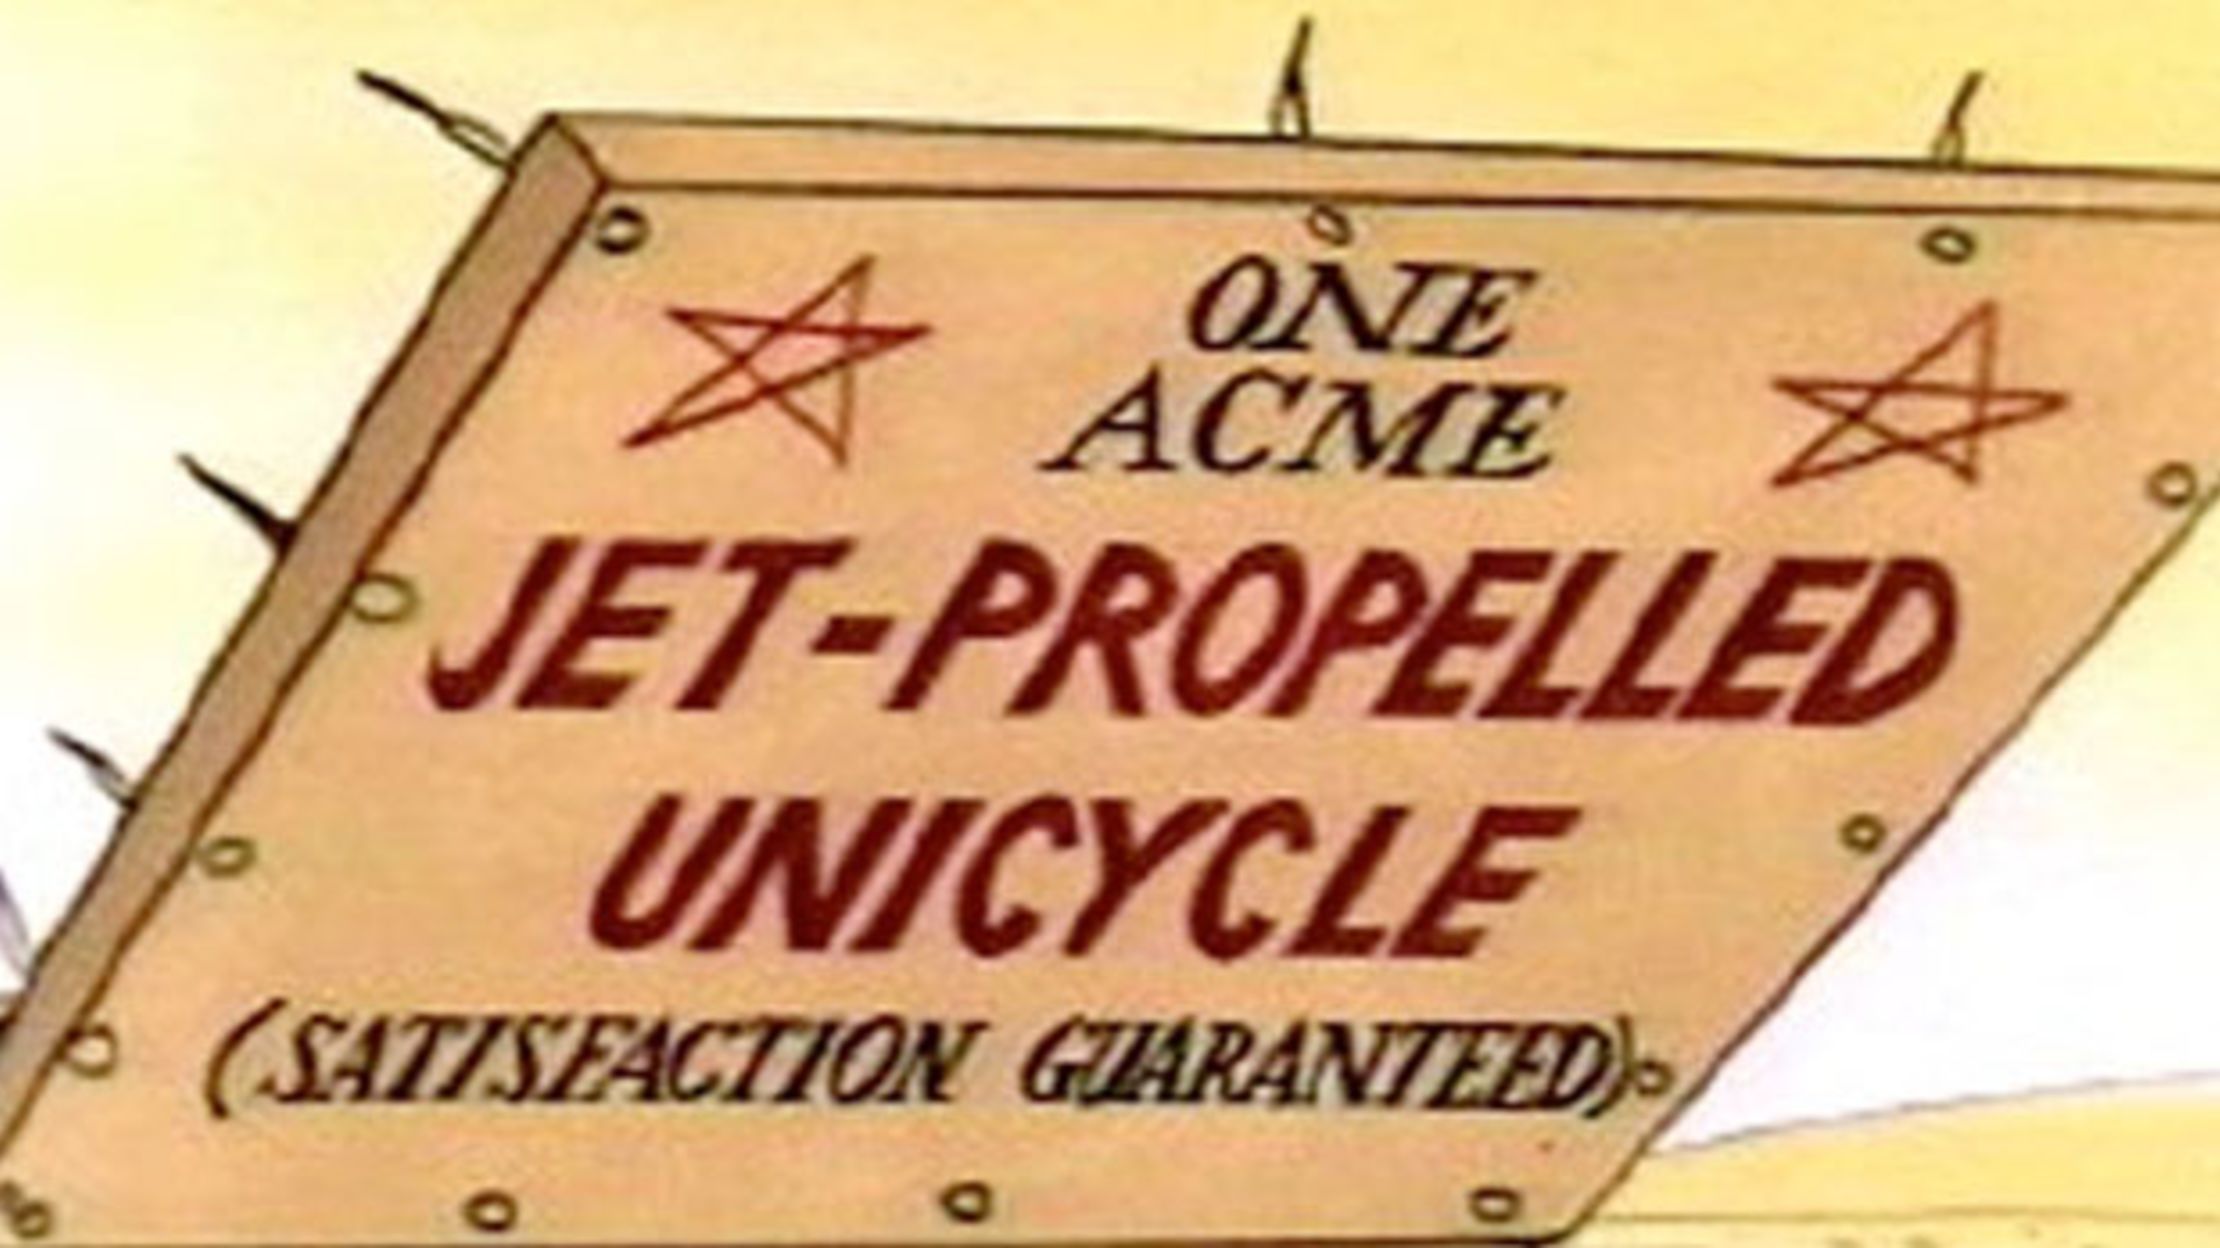 Where Did the Looney Tunes “Acme Corporation” Come From? Mental Floss